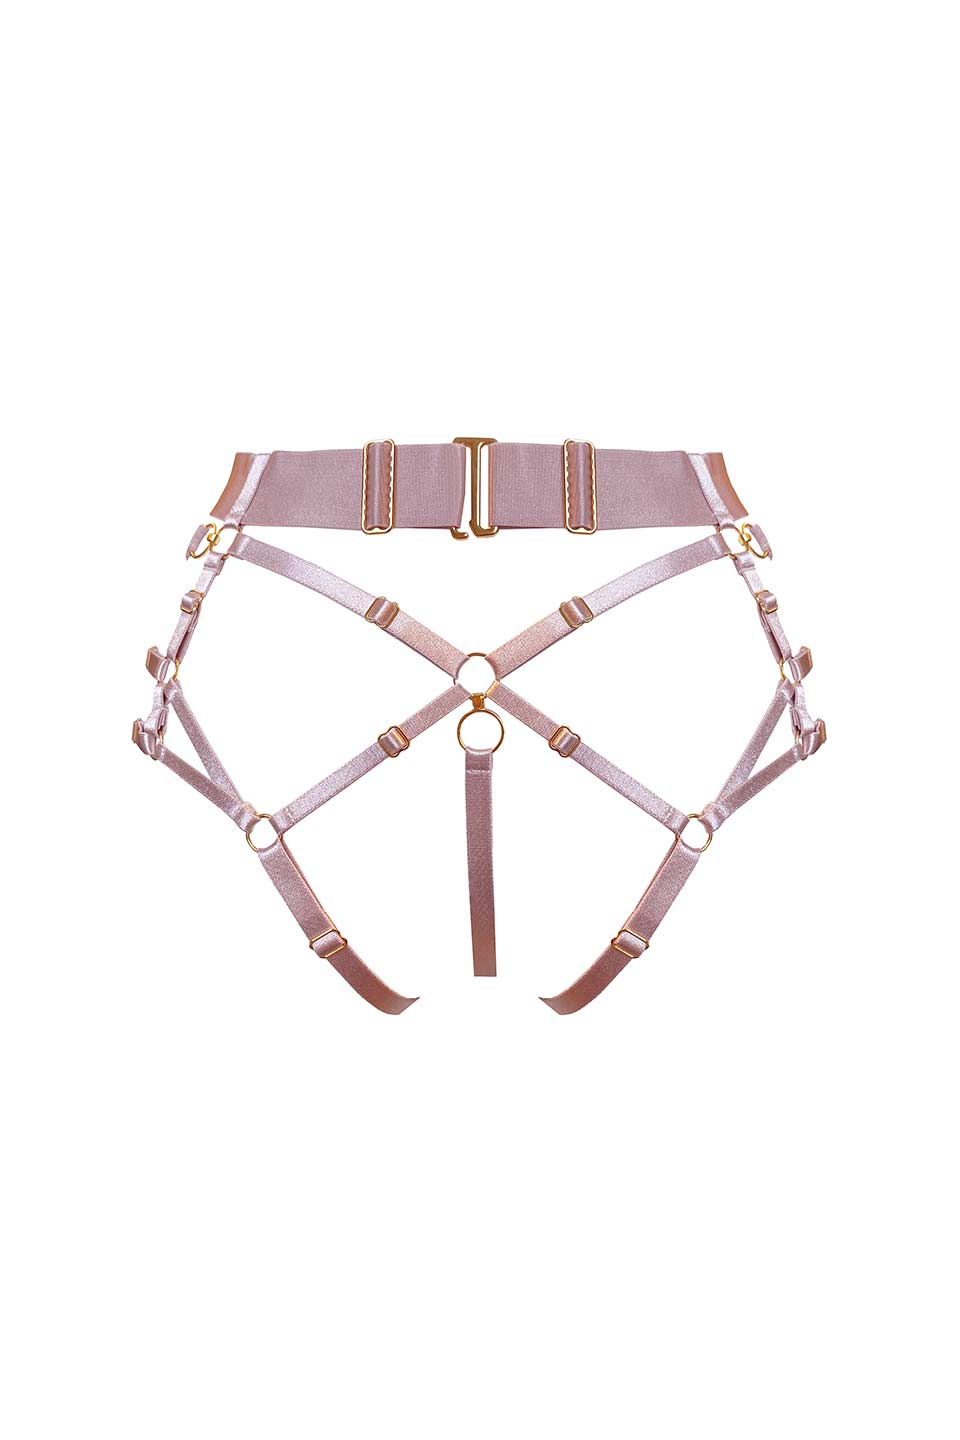 Thumbnail for Product gallery 3, Atelier bordelle kora multi style harness brief without thong rose back